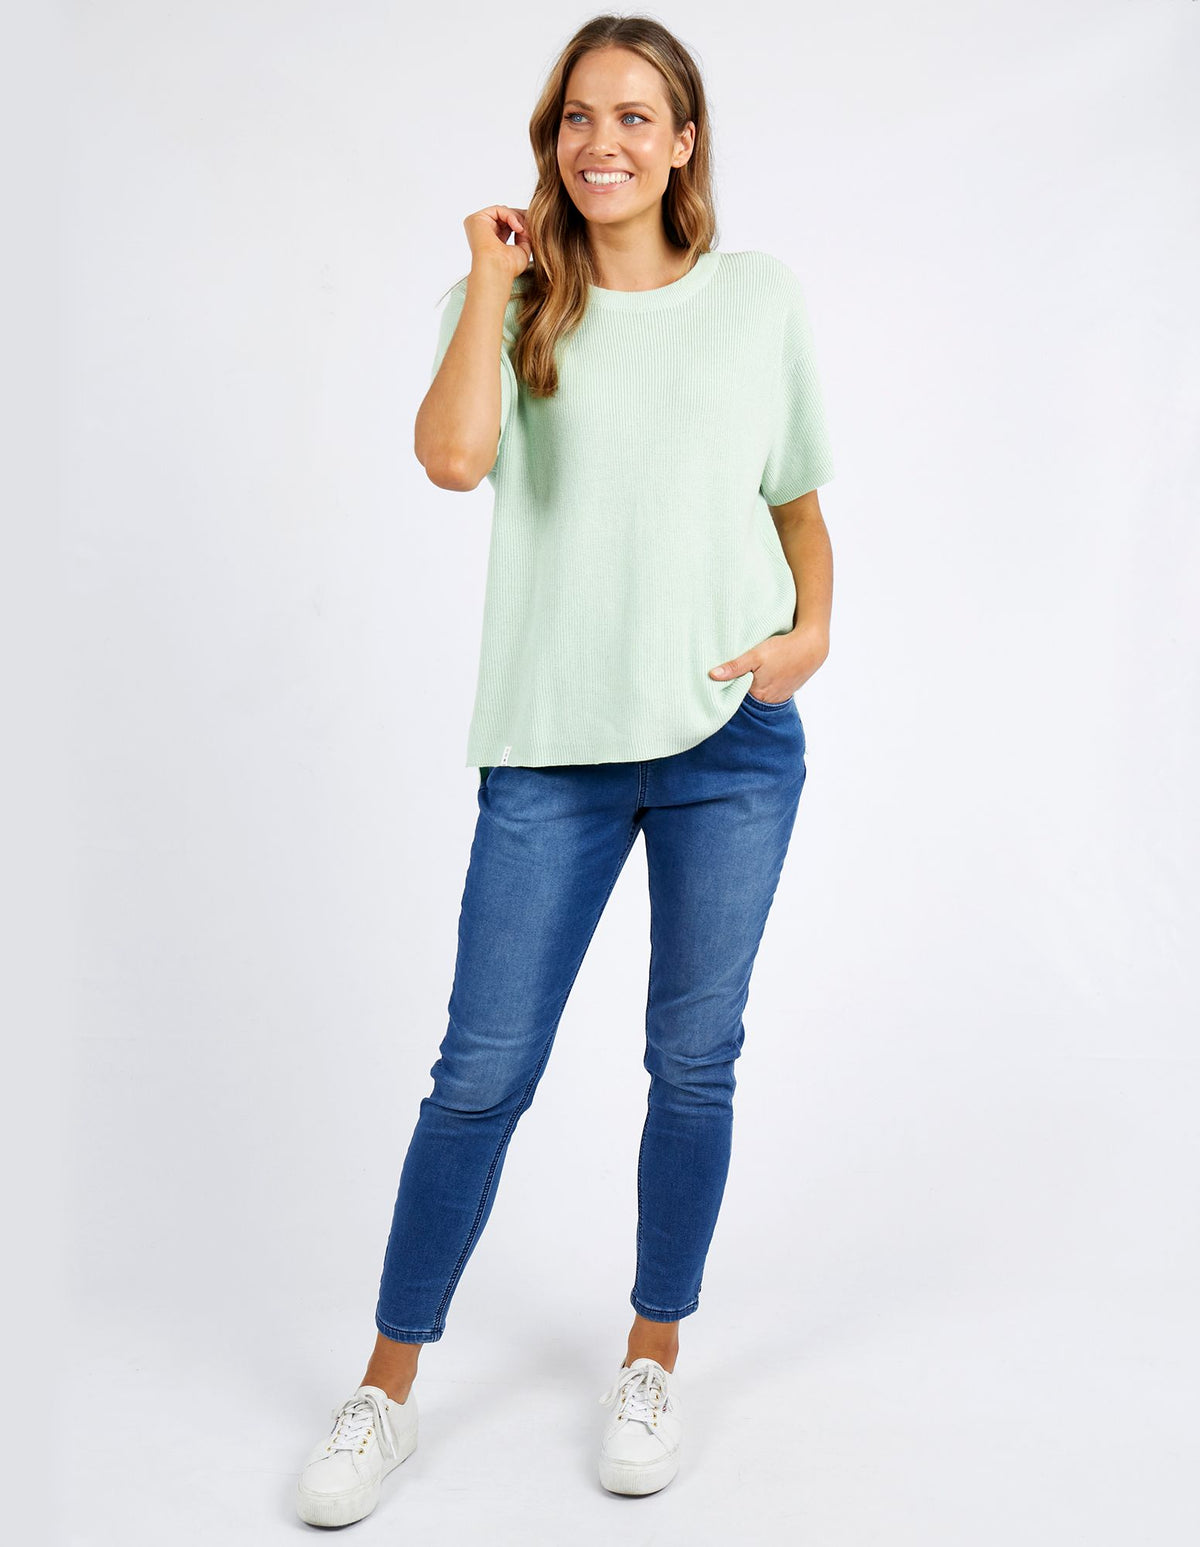 Lilly S/S Knitwear Top - Pistachio - Elm Lifestyle - FUDGE Gifts Home Lifestyle